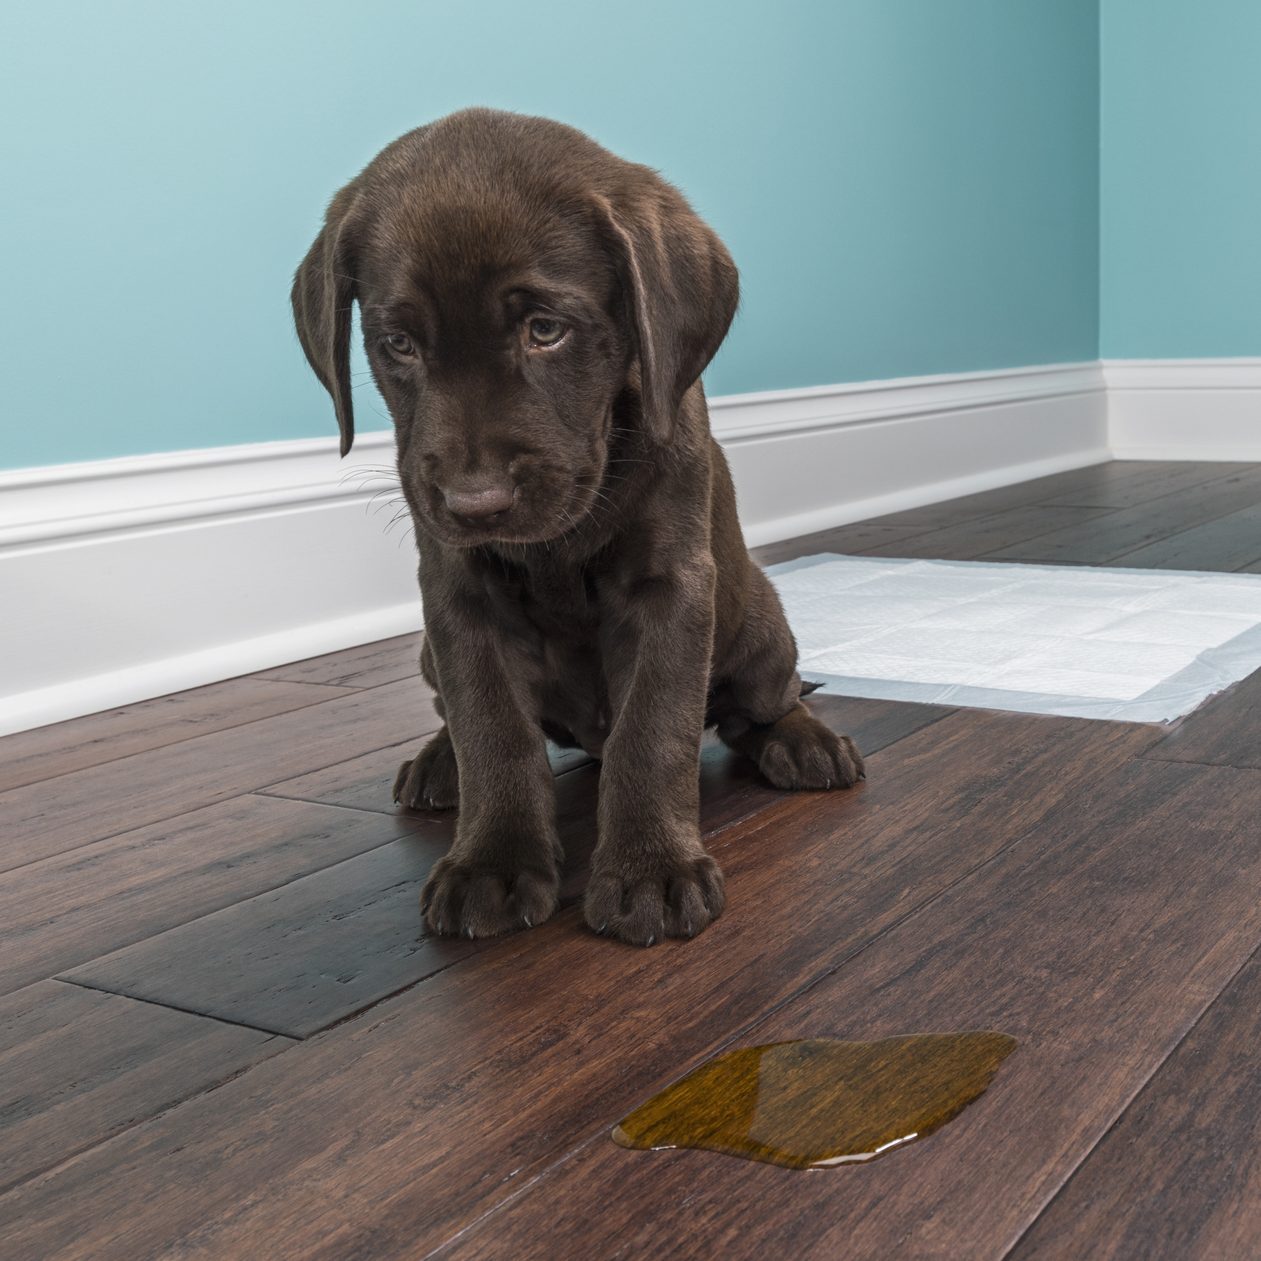 8 Tips on How to Stop a Dog From Peeing in the House